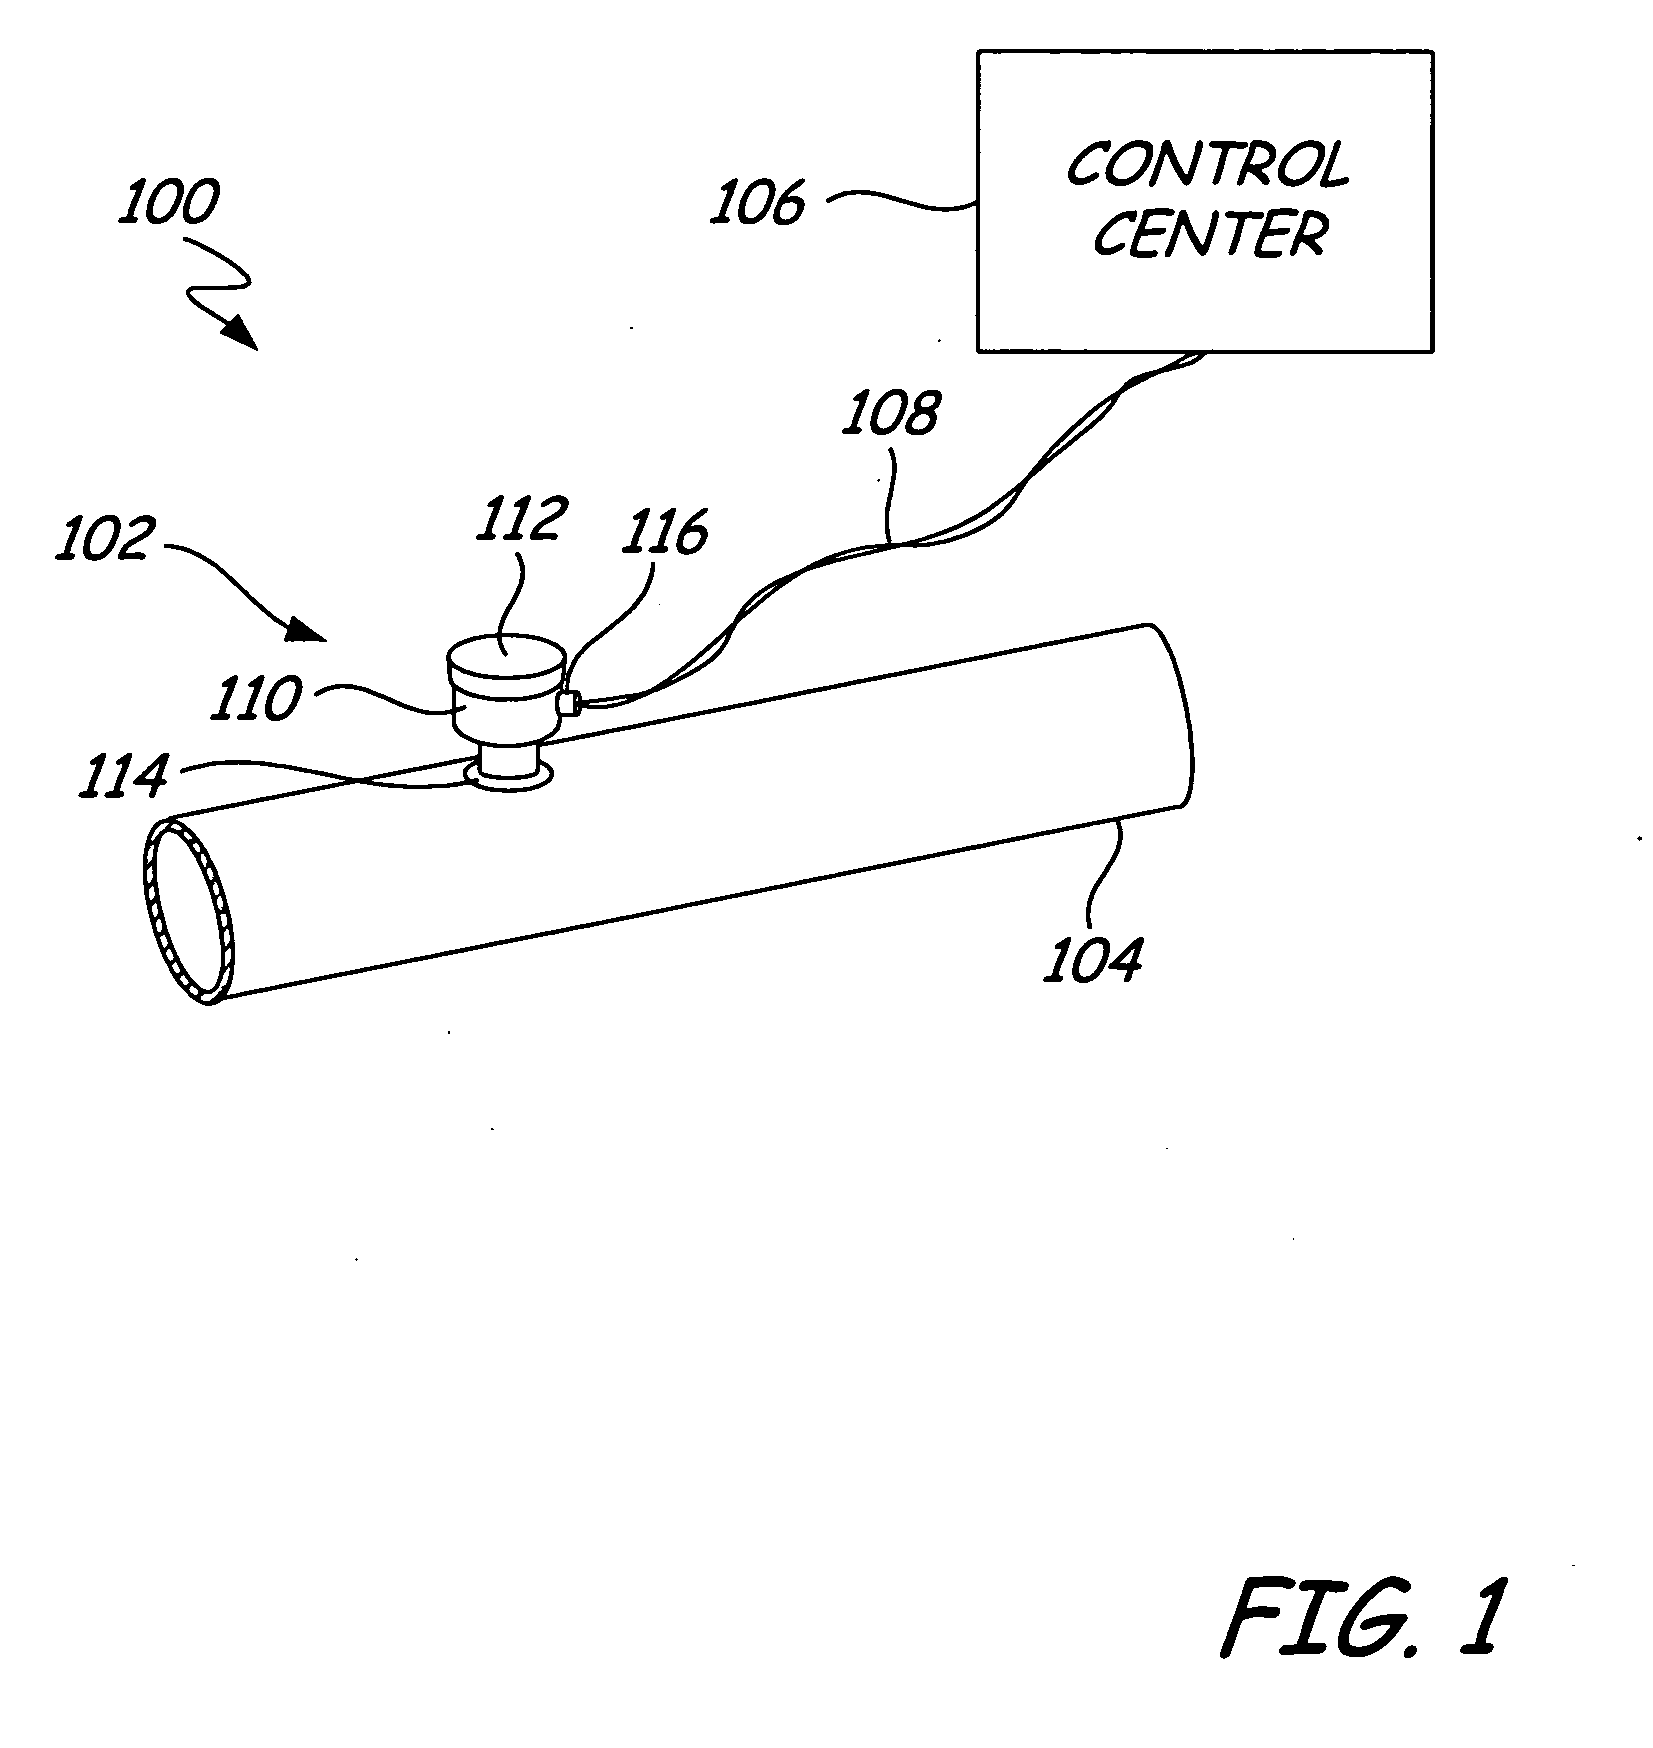 Field device incorporating circuit card assembly as environmental and EMI/RFI shield